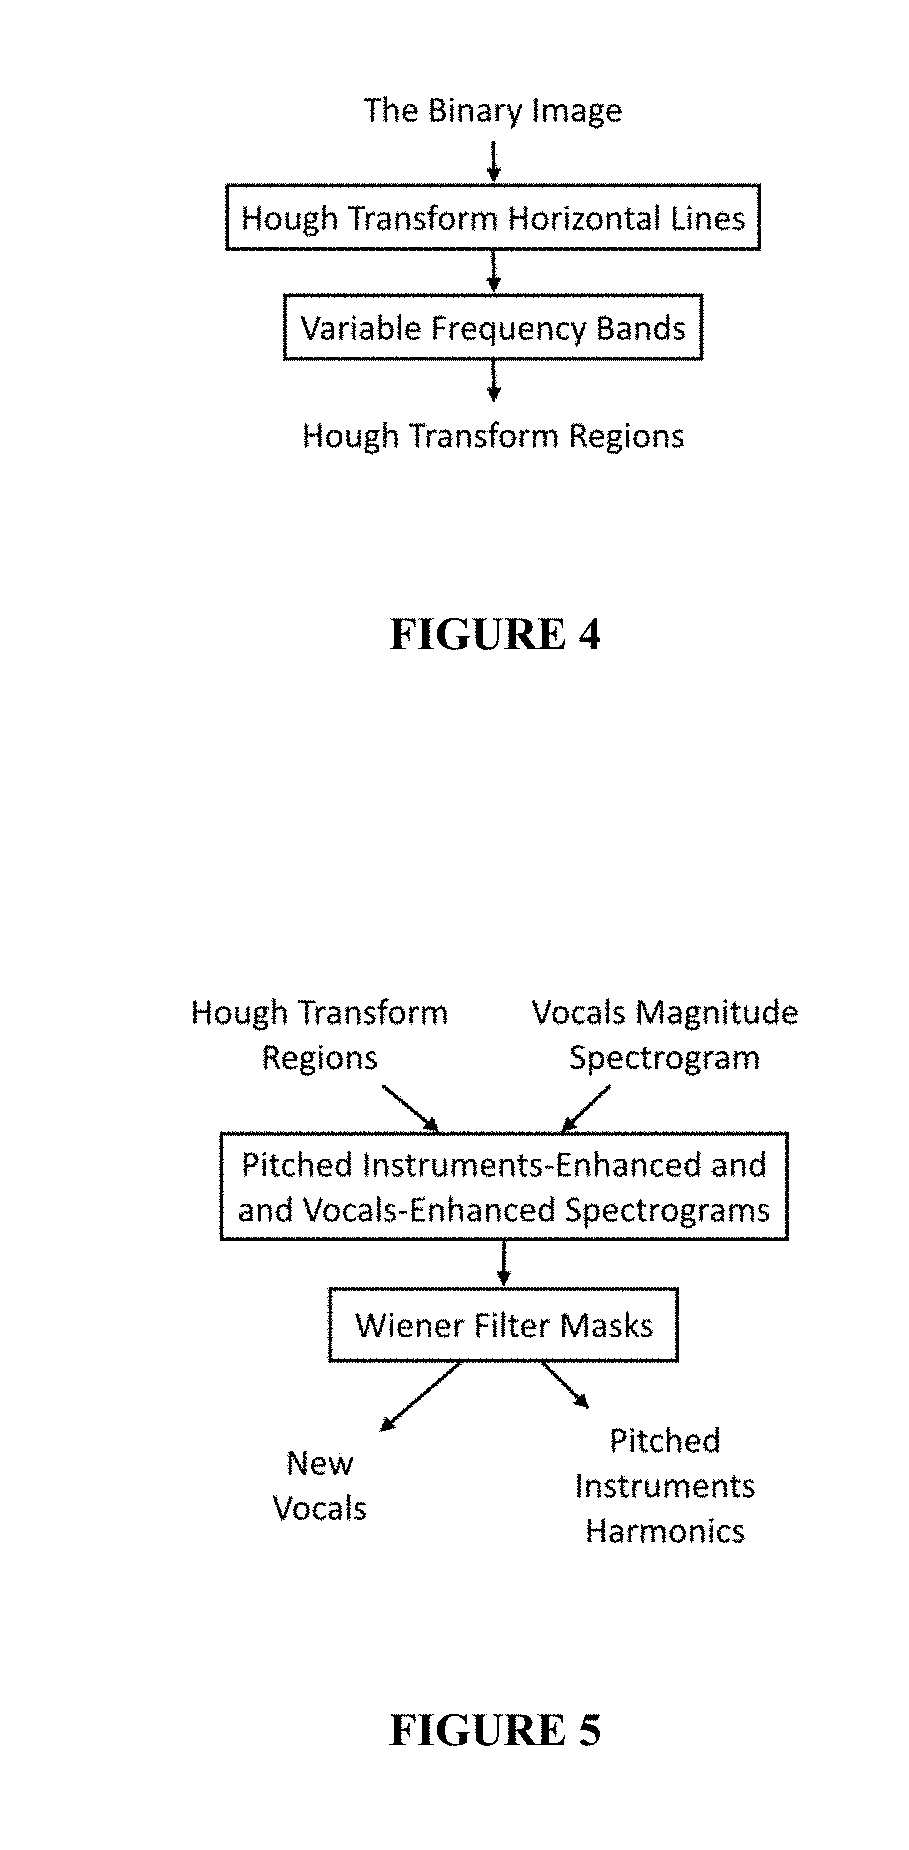 System and Method for improving singing voice separation from monaural music recordings